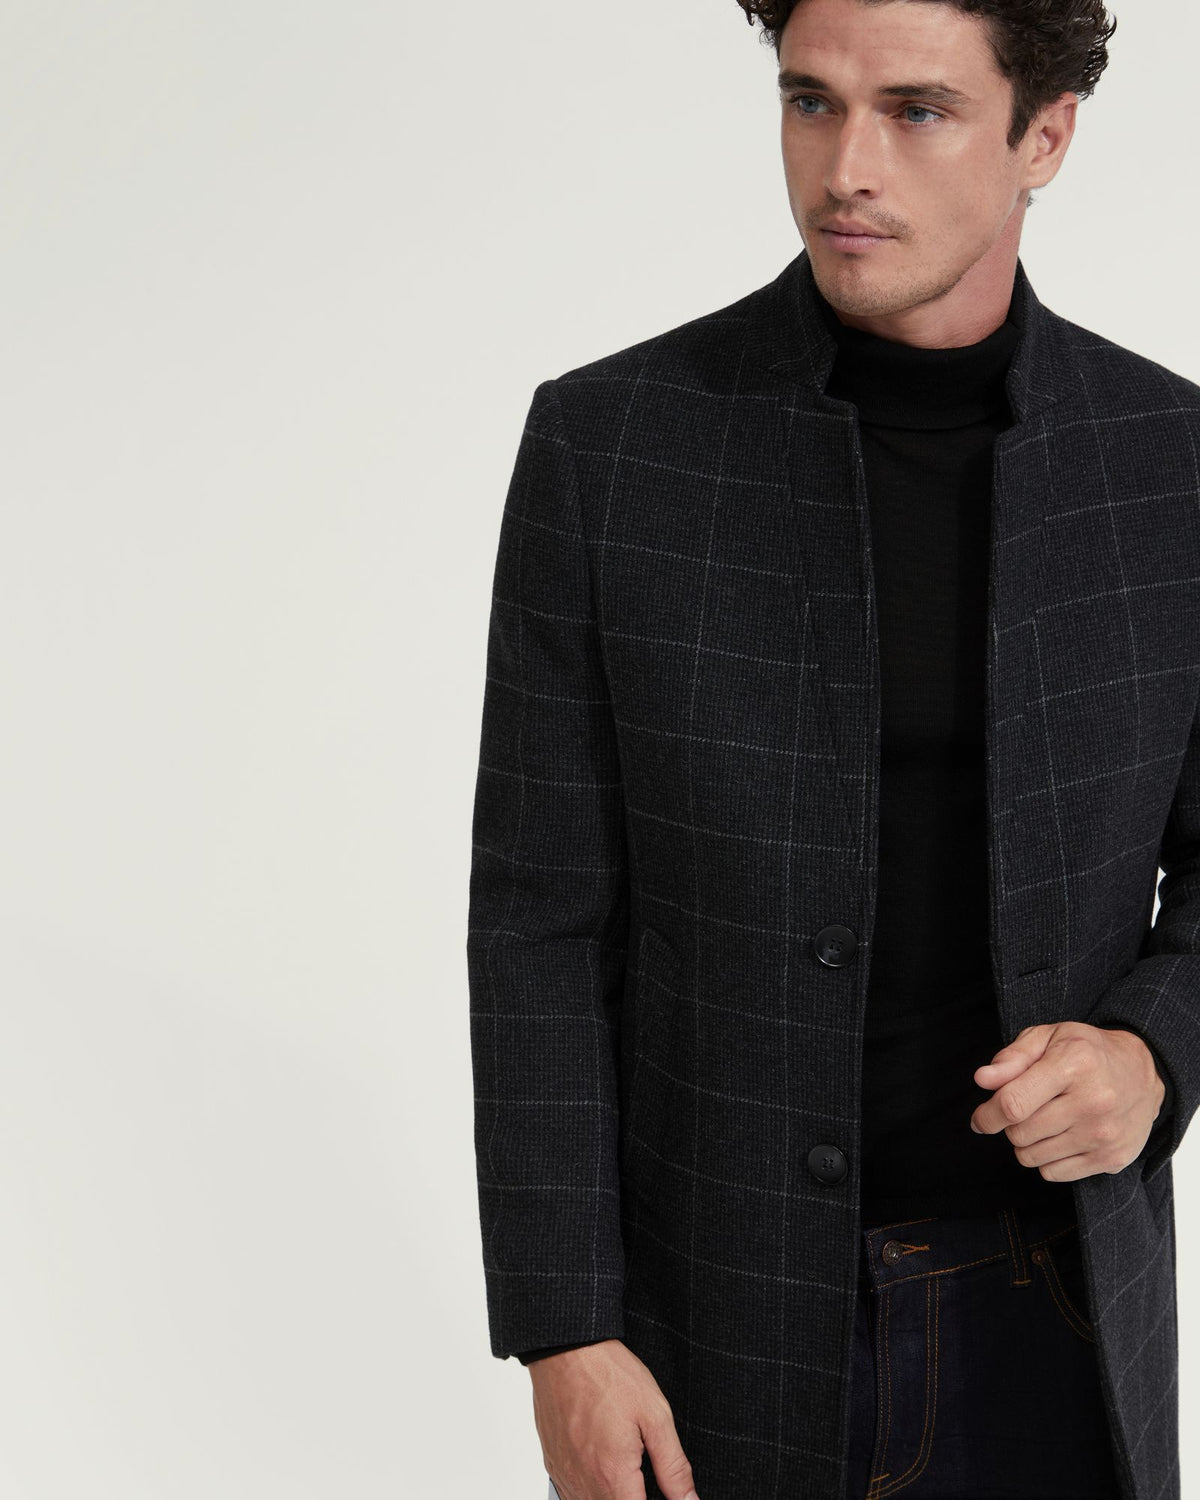 AUSTIN WOOL RICH CHECKED OVERCOAT - AVAILABLE ~ 1-2 weeks MENS JACKETS AND COATS